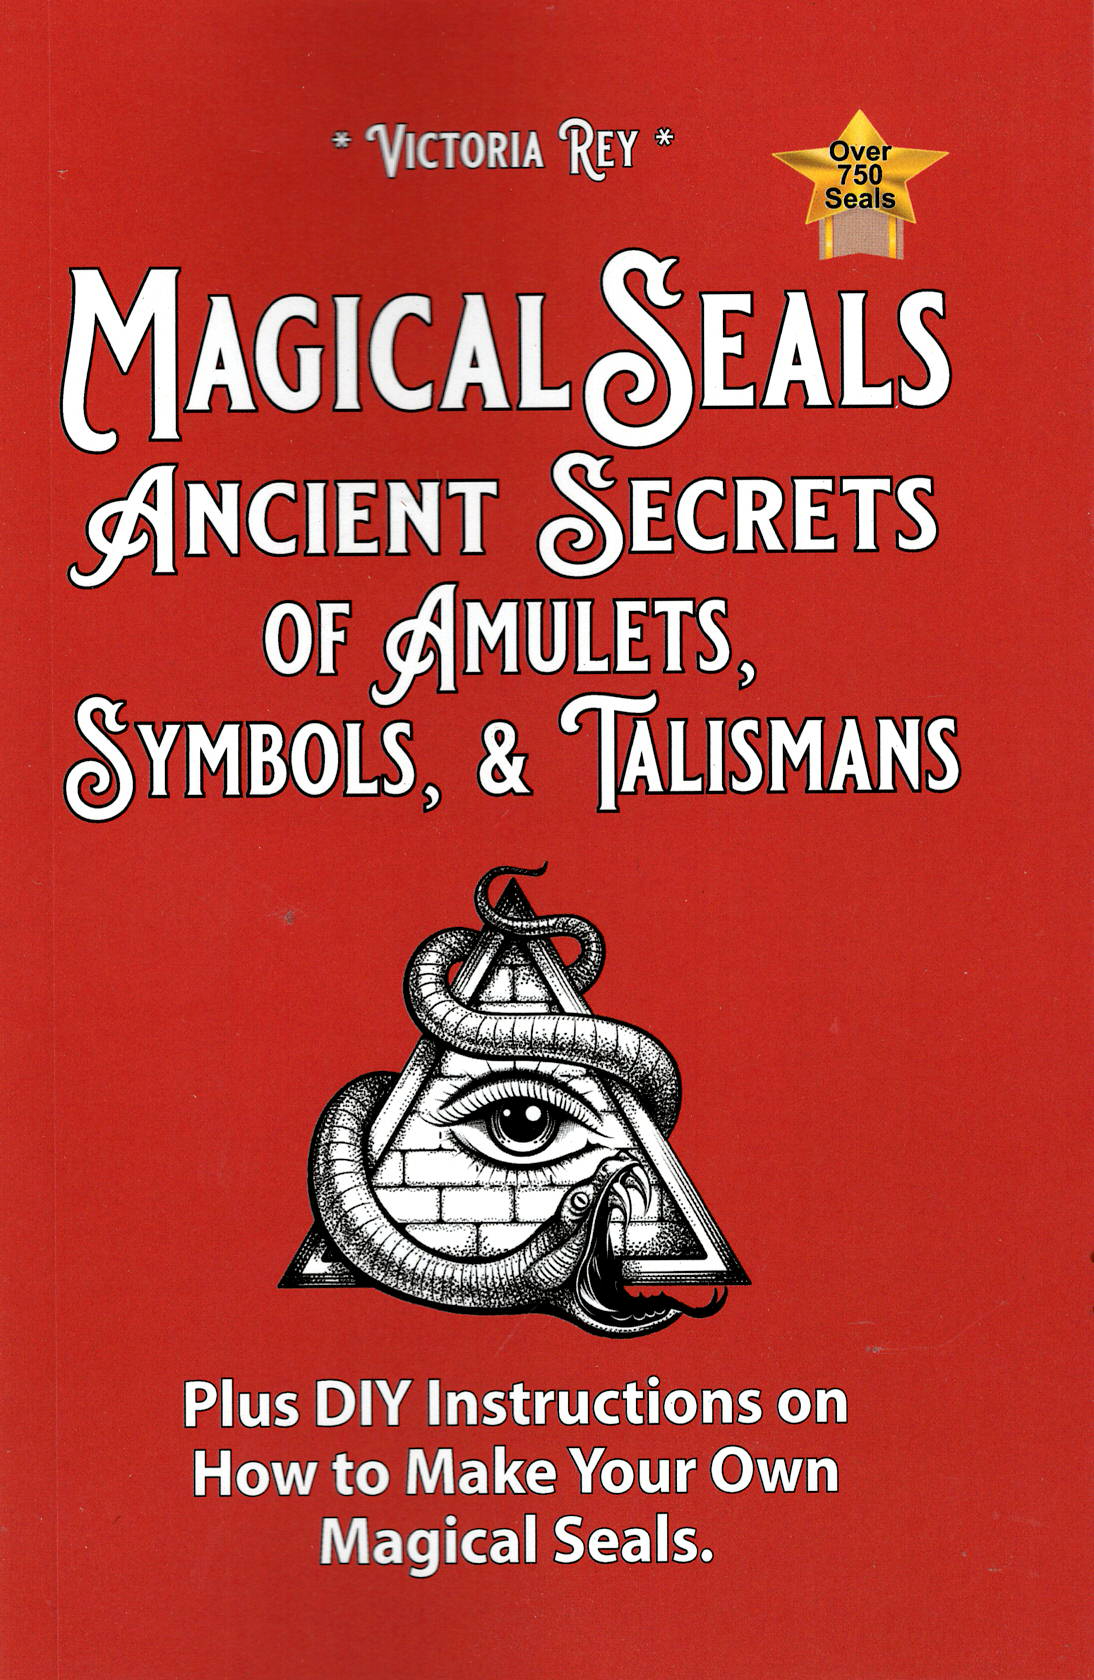 Magical Seals, Ancient Secrets of Amulets, Symbols And Talismans: Plus DIY Instructions to Make Your Own Magical Seals